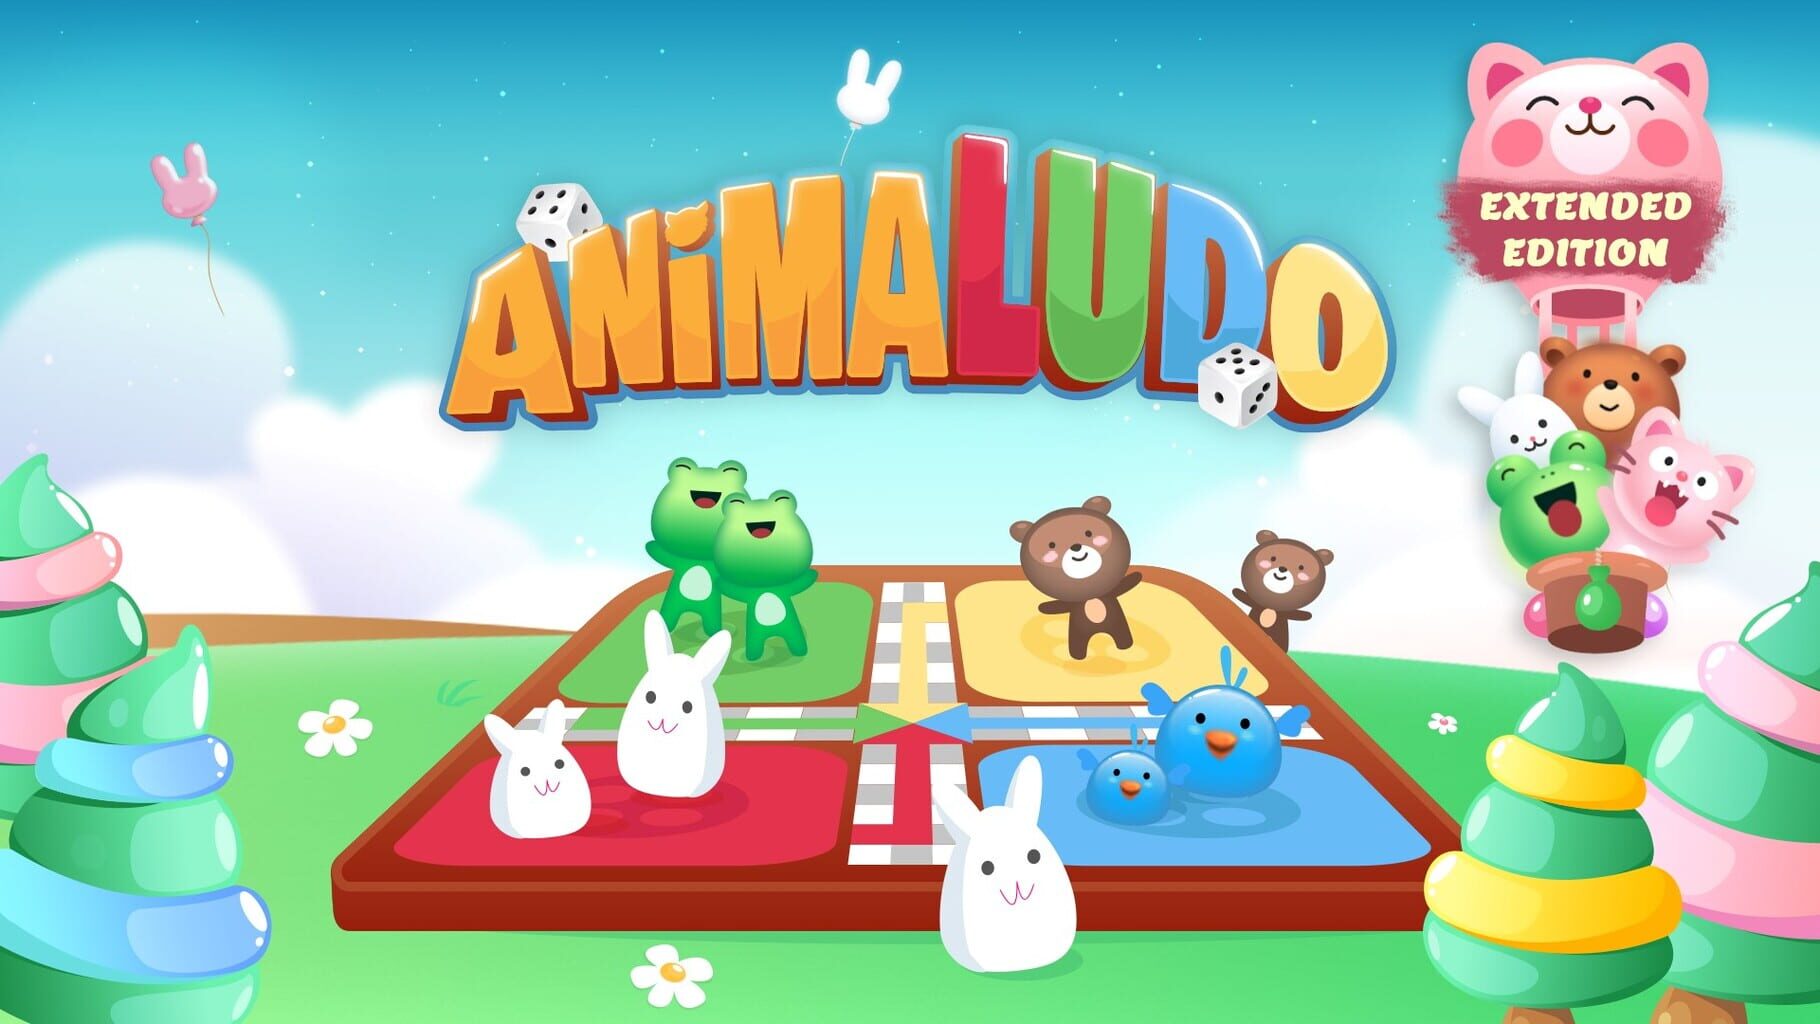 AnimaLudo: Extended Edition artwork